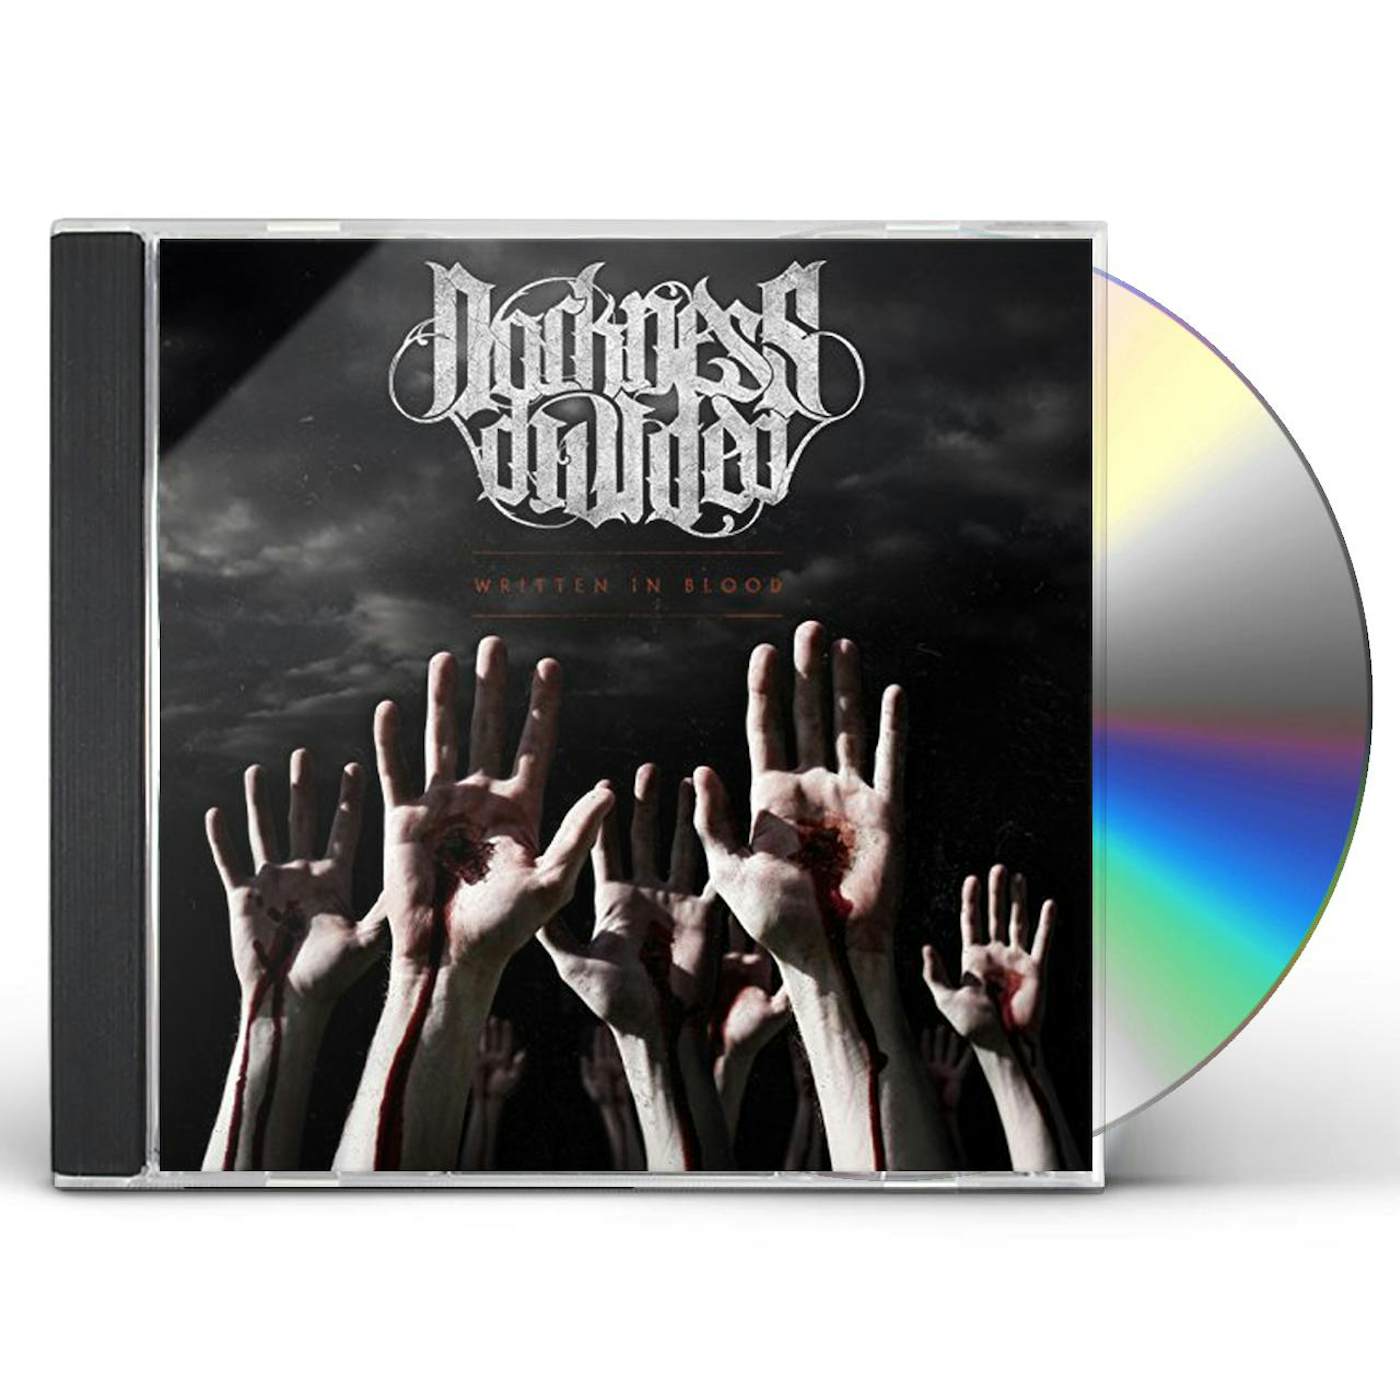 Darkness Divided WRITTEN IN BLOOD CD